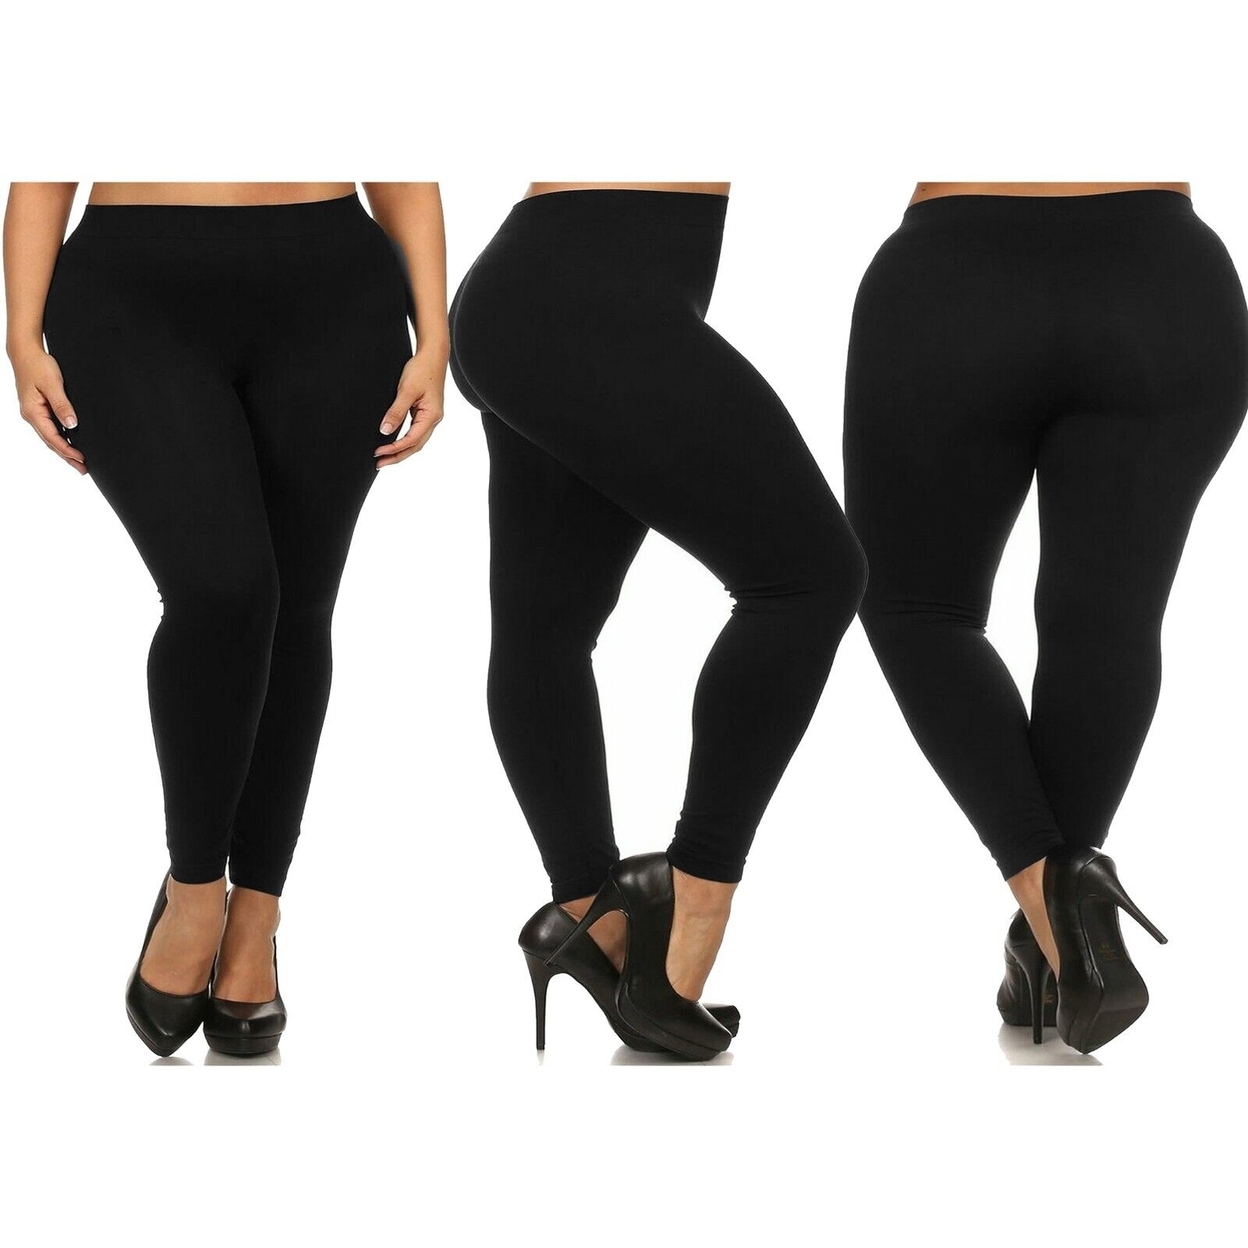 2-Pack: Women's Casual Ultra-Soft Smooth High Waisted Athletic Active Yoga Leggings Plus Size Available - Beige & Black, 1x